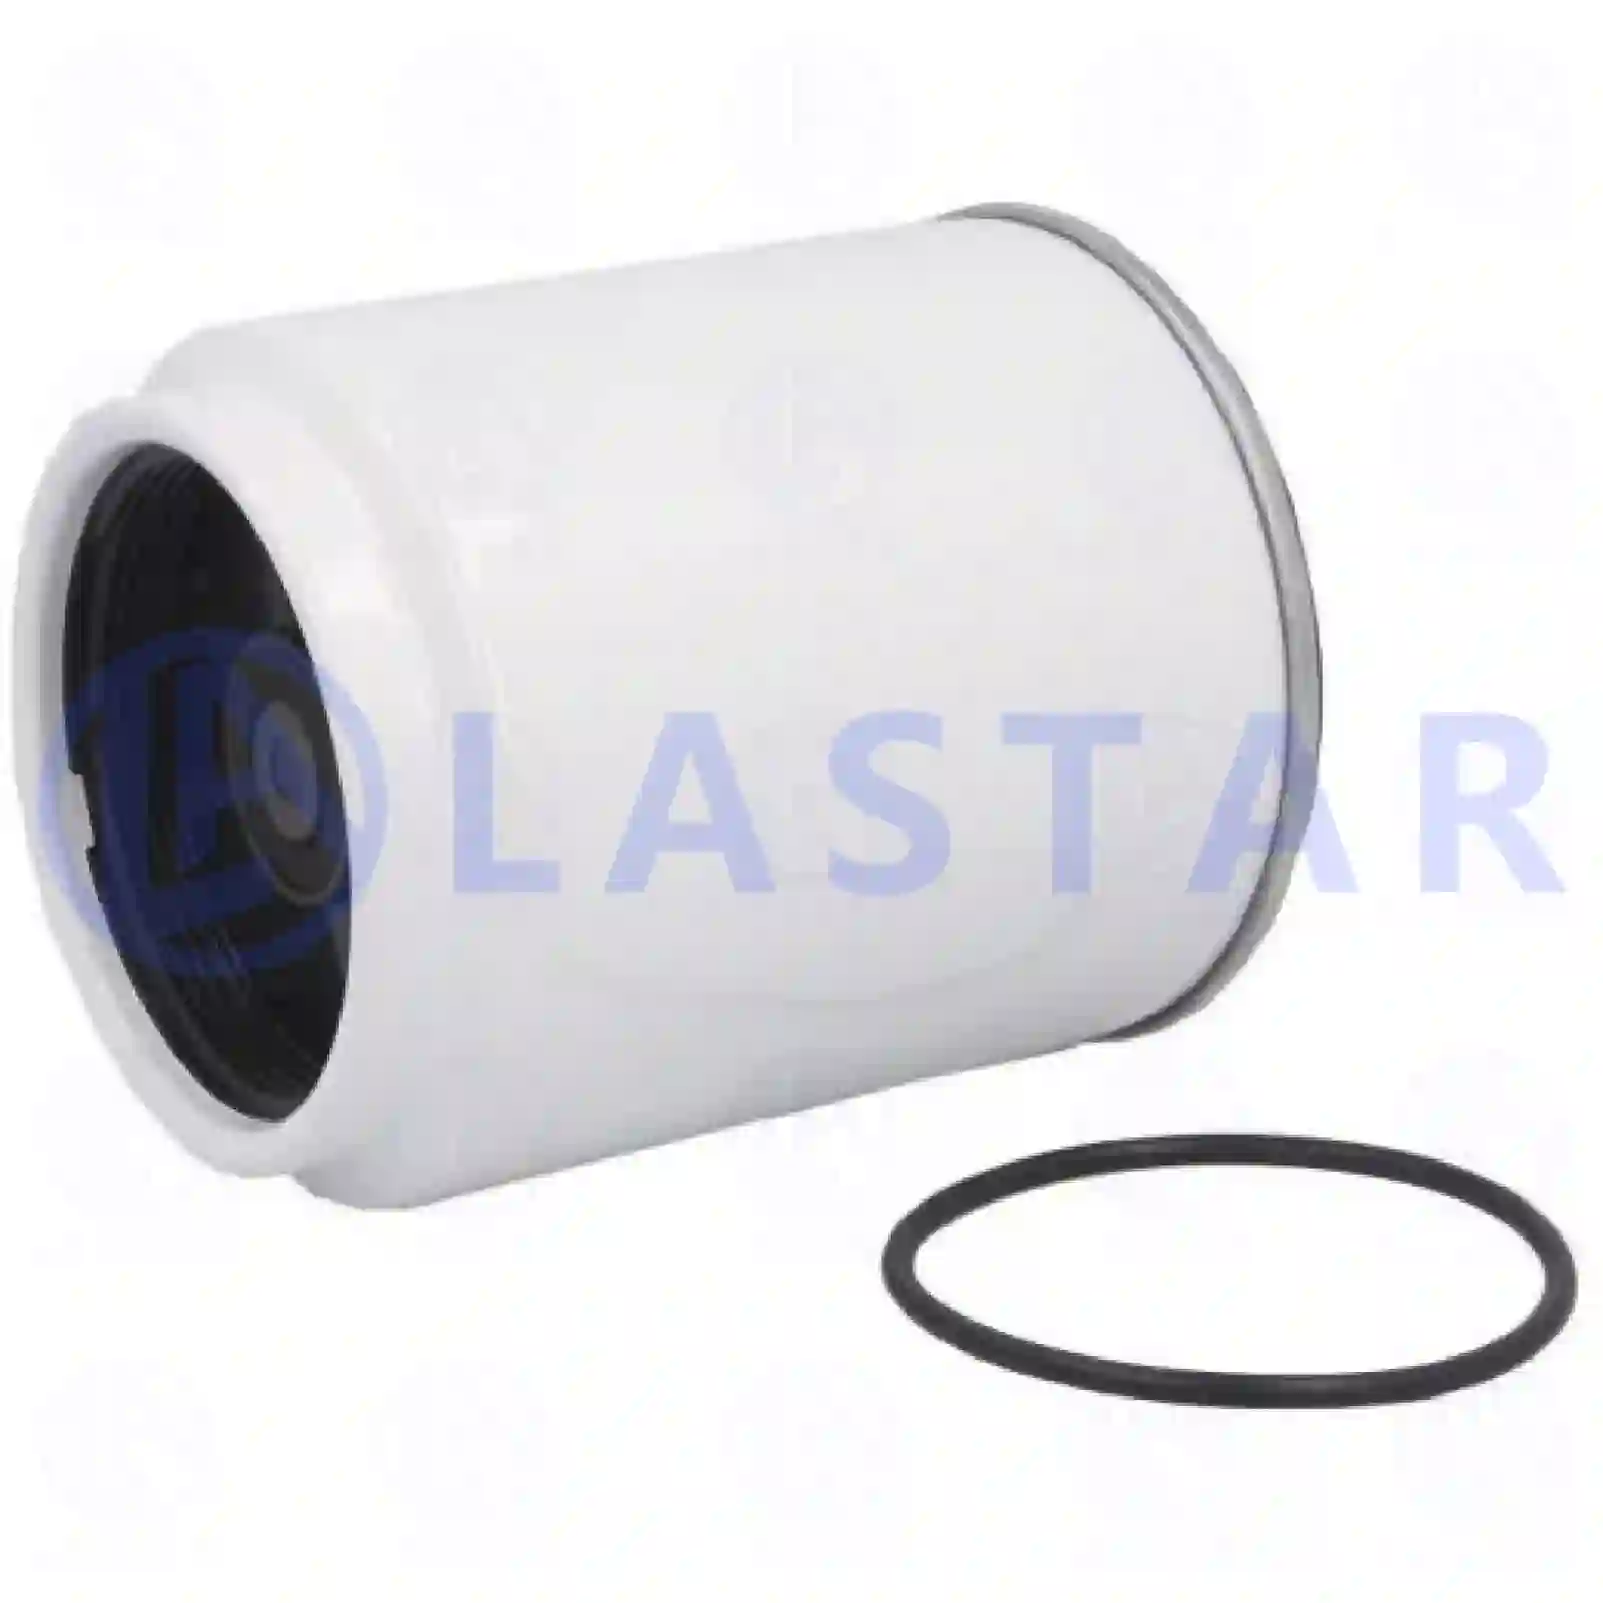 Fuel filter, water separator, 77723970, 21380521, 7420998346, 7421380472, 7421764968, 7421764981, 164009Z00C, 5221380479, 20879806, 21017305, 21380475, 21380479, 21764964, 21764966, 21764968, ZG10166-0008 ||  77723970 Lastar Spare Part | Truck Spare Parts, Auotomotive Spare Parts Fuel filter, water separator, 77723970, 21380521, 7420998346, 7421380472, 7421764968, 7421764981, 164009Z00C, 5221380479, 20879806, 21017305, 21380475, 21380479, 21764964, 21764966, 21764968, ZG10166-0008 ||  77723970 Lastar Spare Part | Truck Spare Parts, Auotomotive Spare Parts